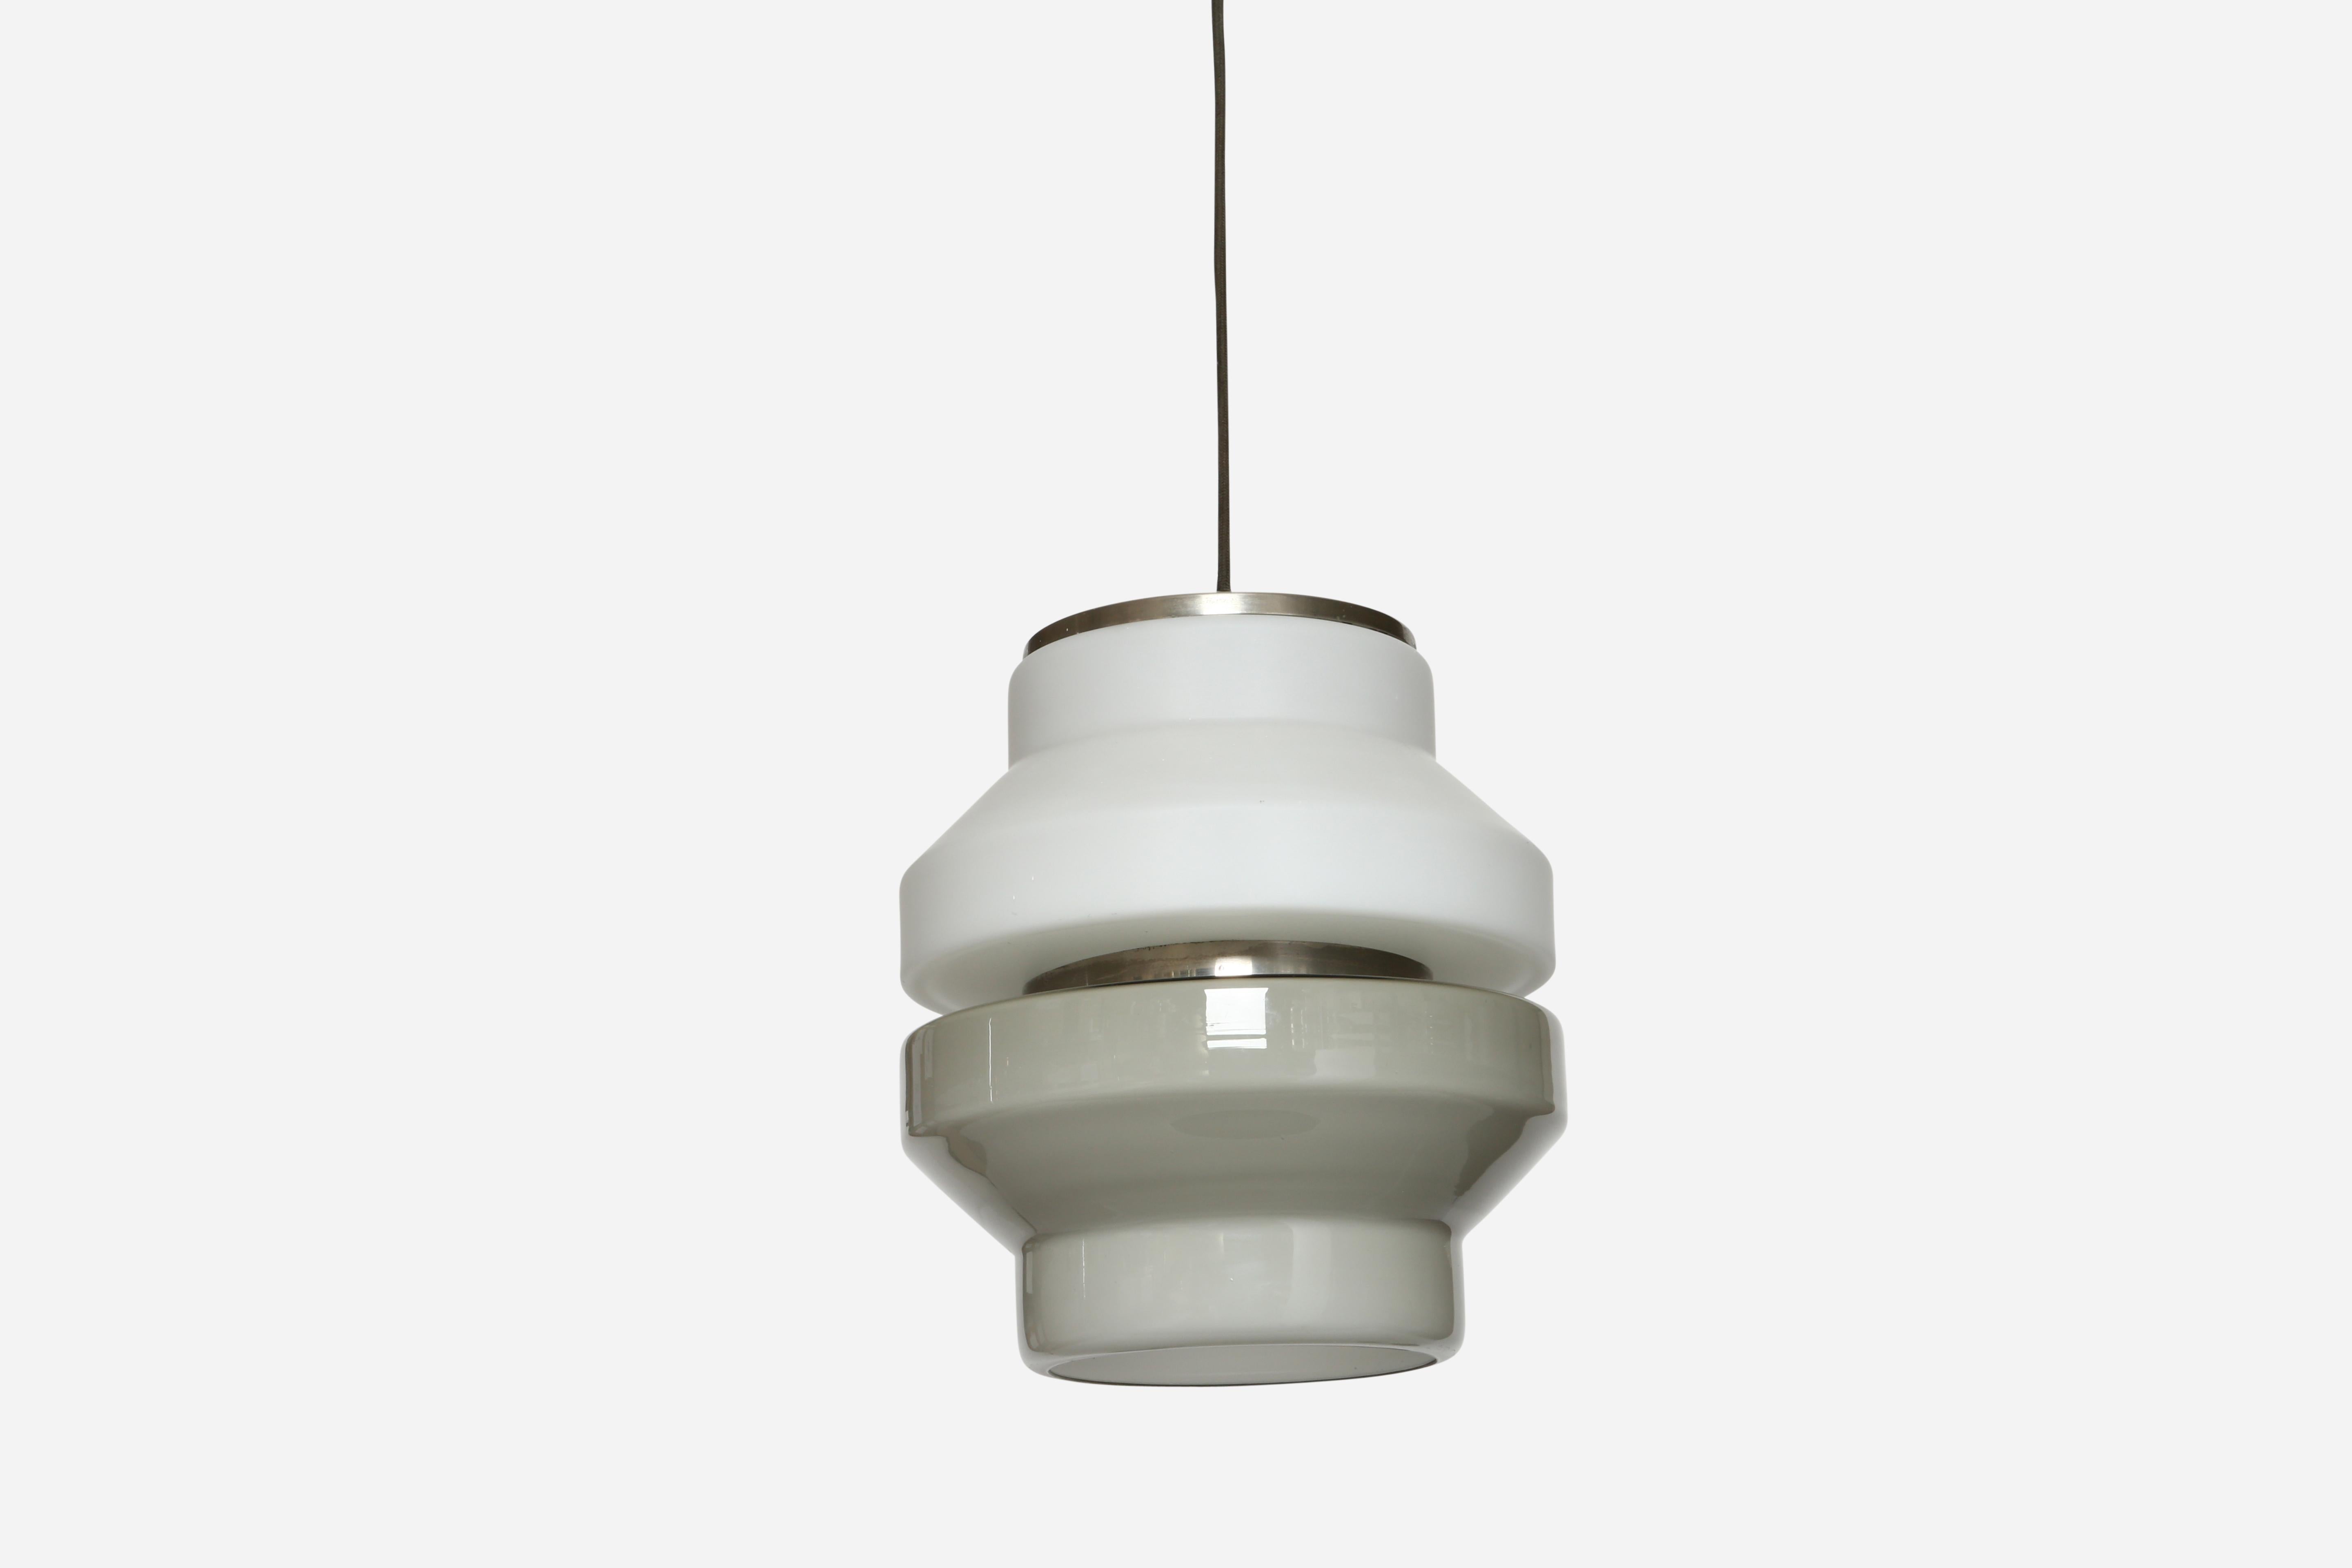 Murano glass ceiling pendant by Vistosi, attributed
Two tone Murano glass in grey and white
Takes one medium base bulb.
Complimentary US rewiring upon request
Measures : Height of the glass is 13 inches.
Overall drop is adjustable, cord can be made